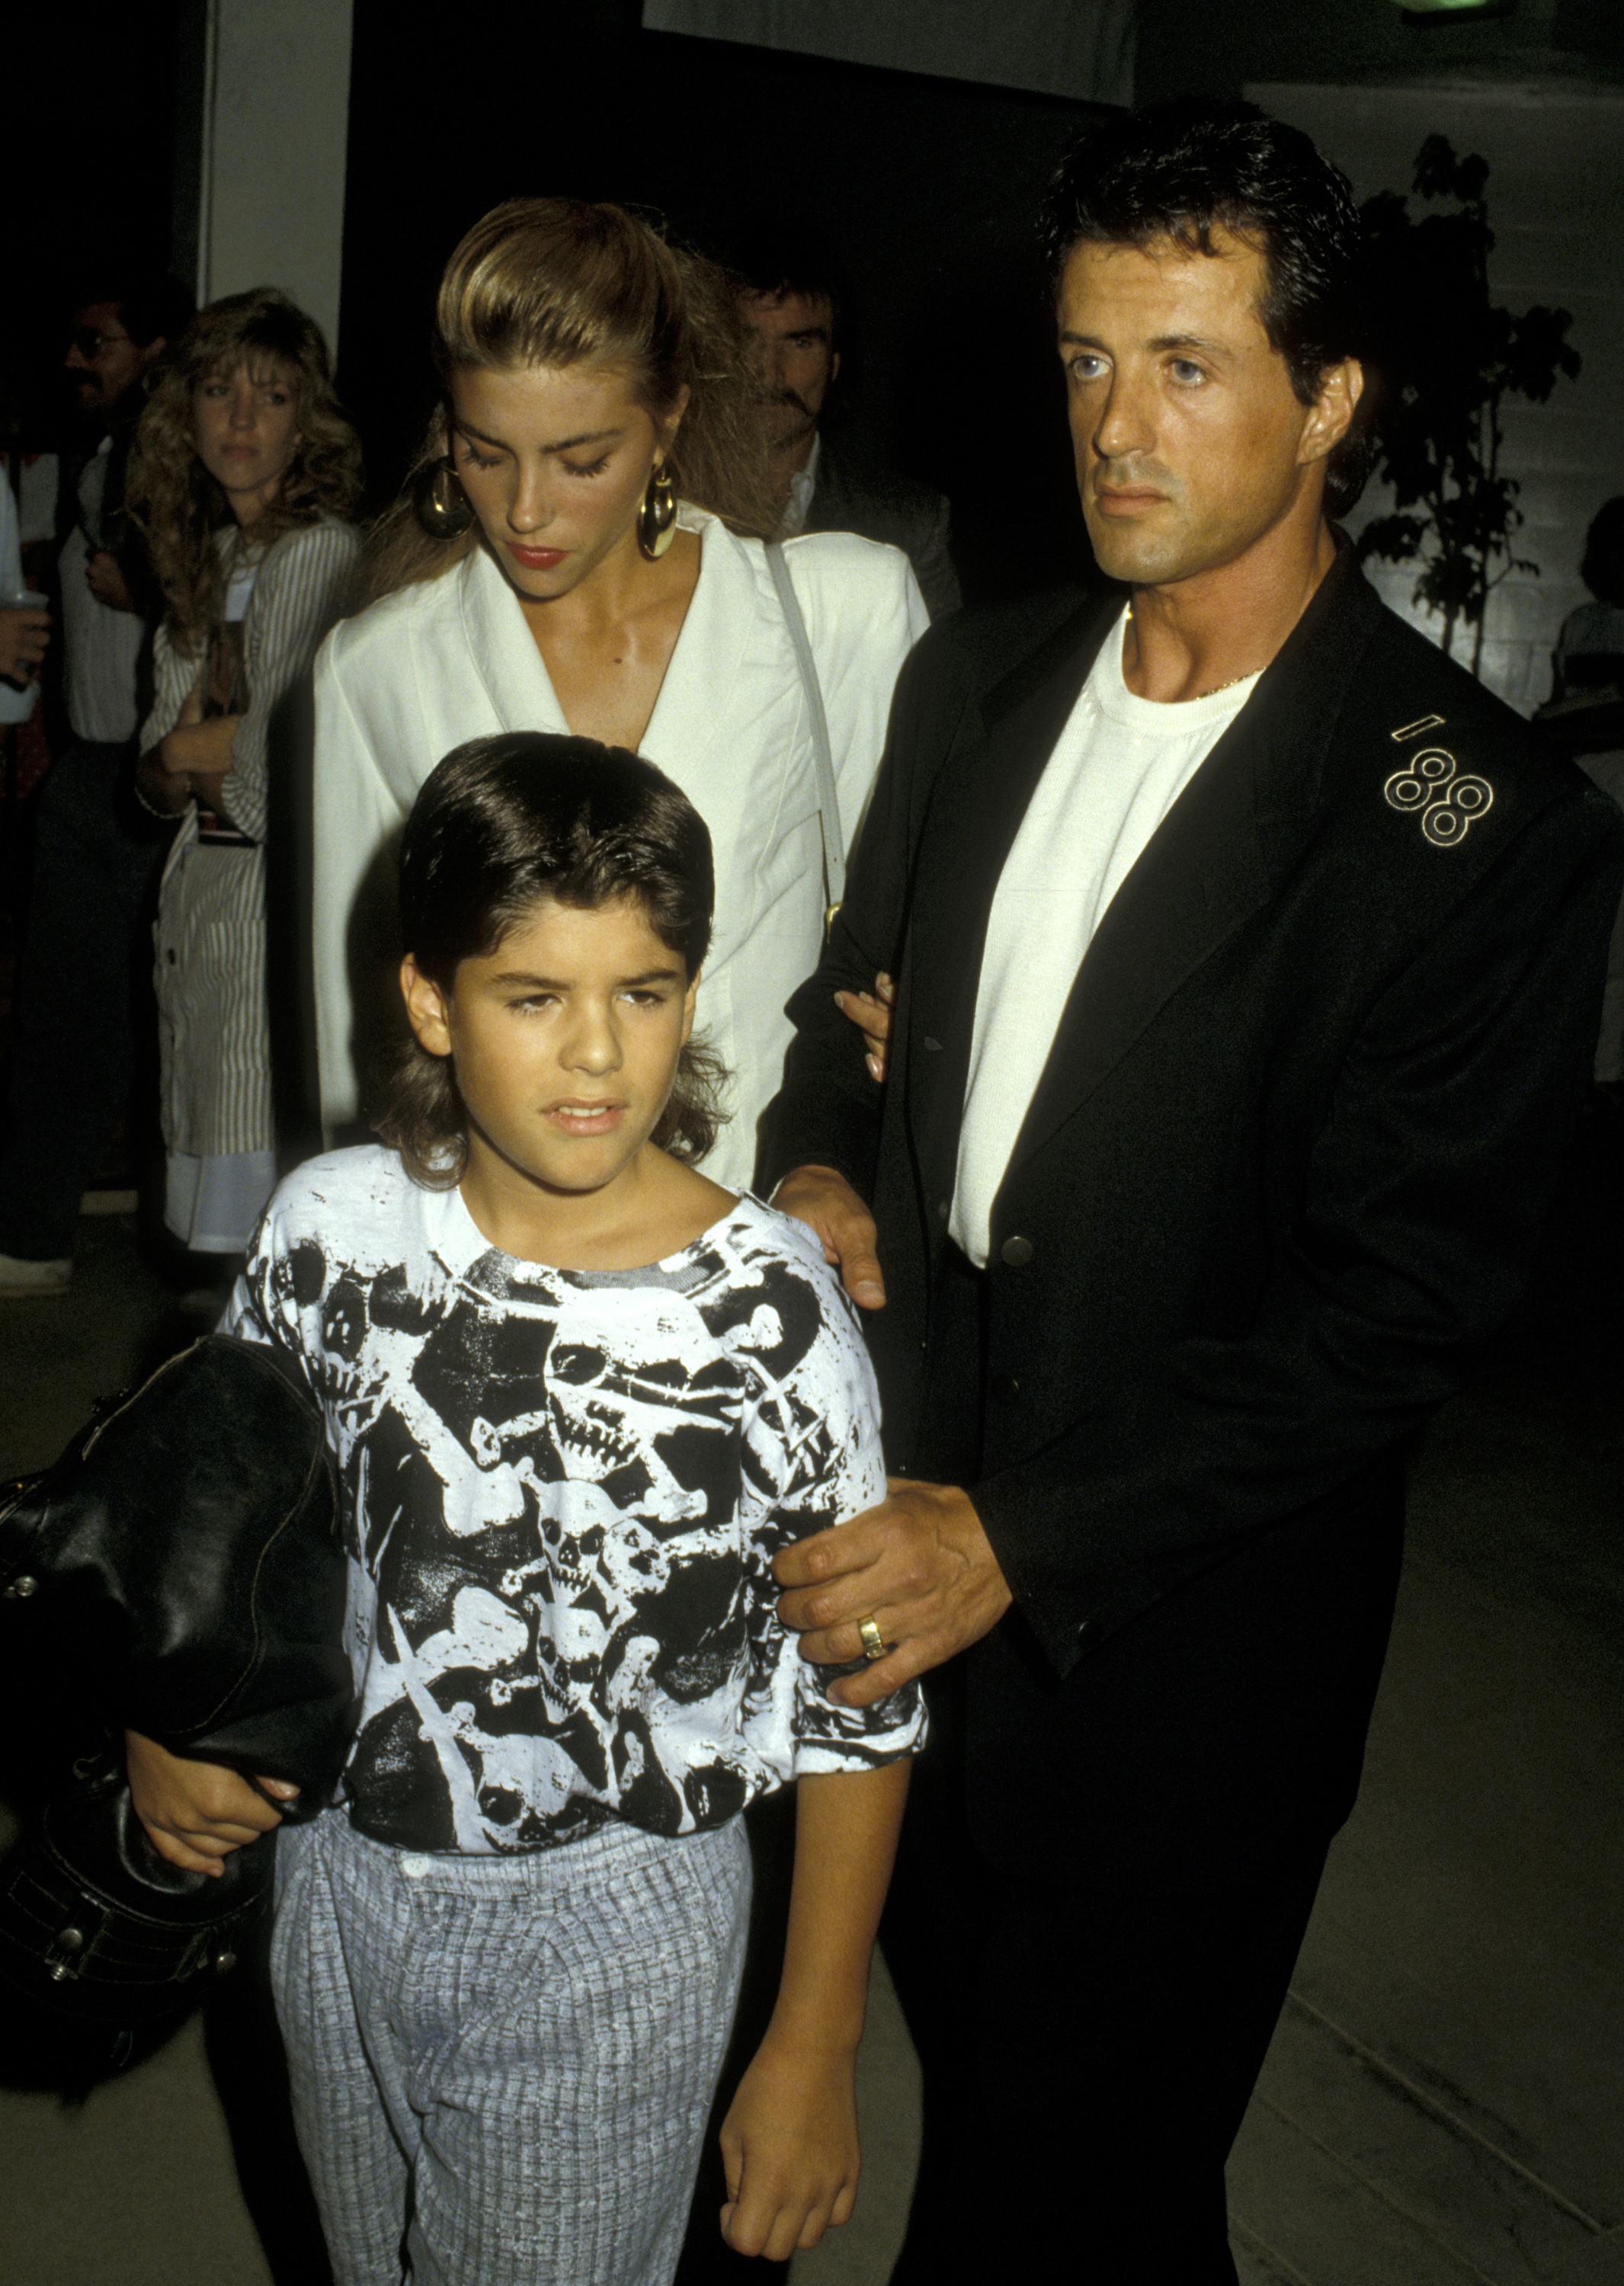 Jennifer Flavin Sylvester Stallone and his son Sage Stallone at a polo match in 1988 | Source: Getty Images